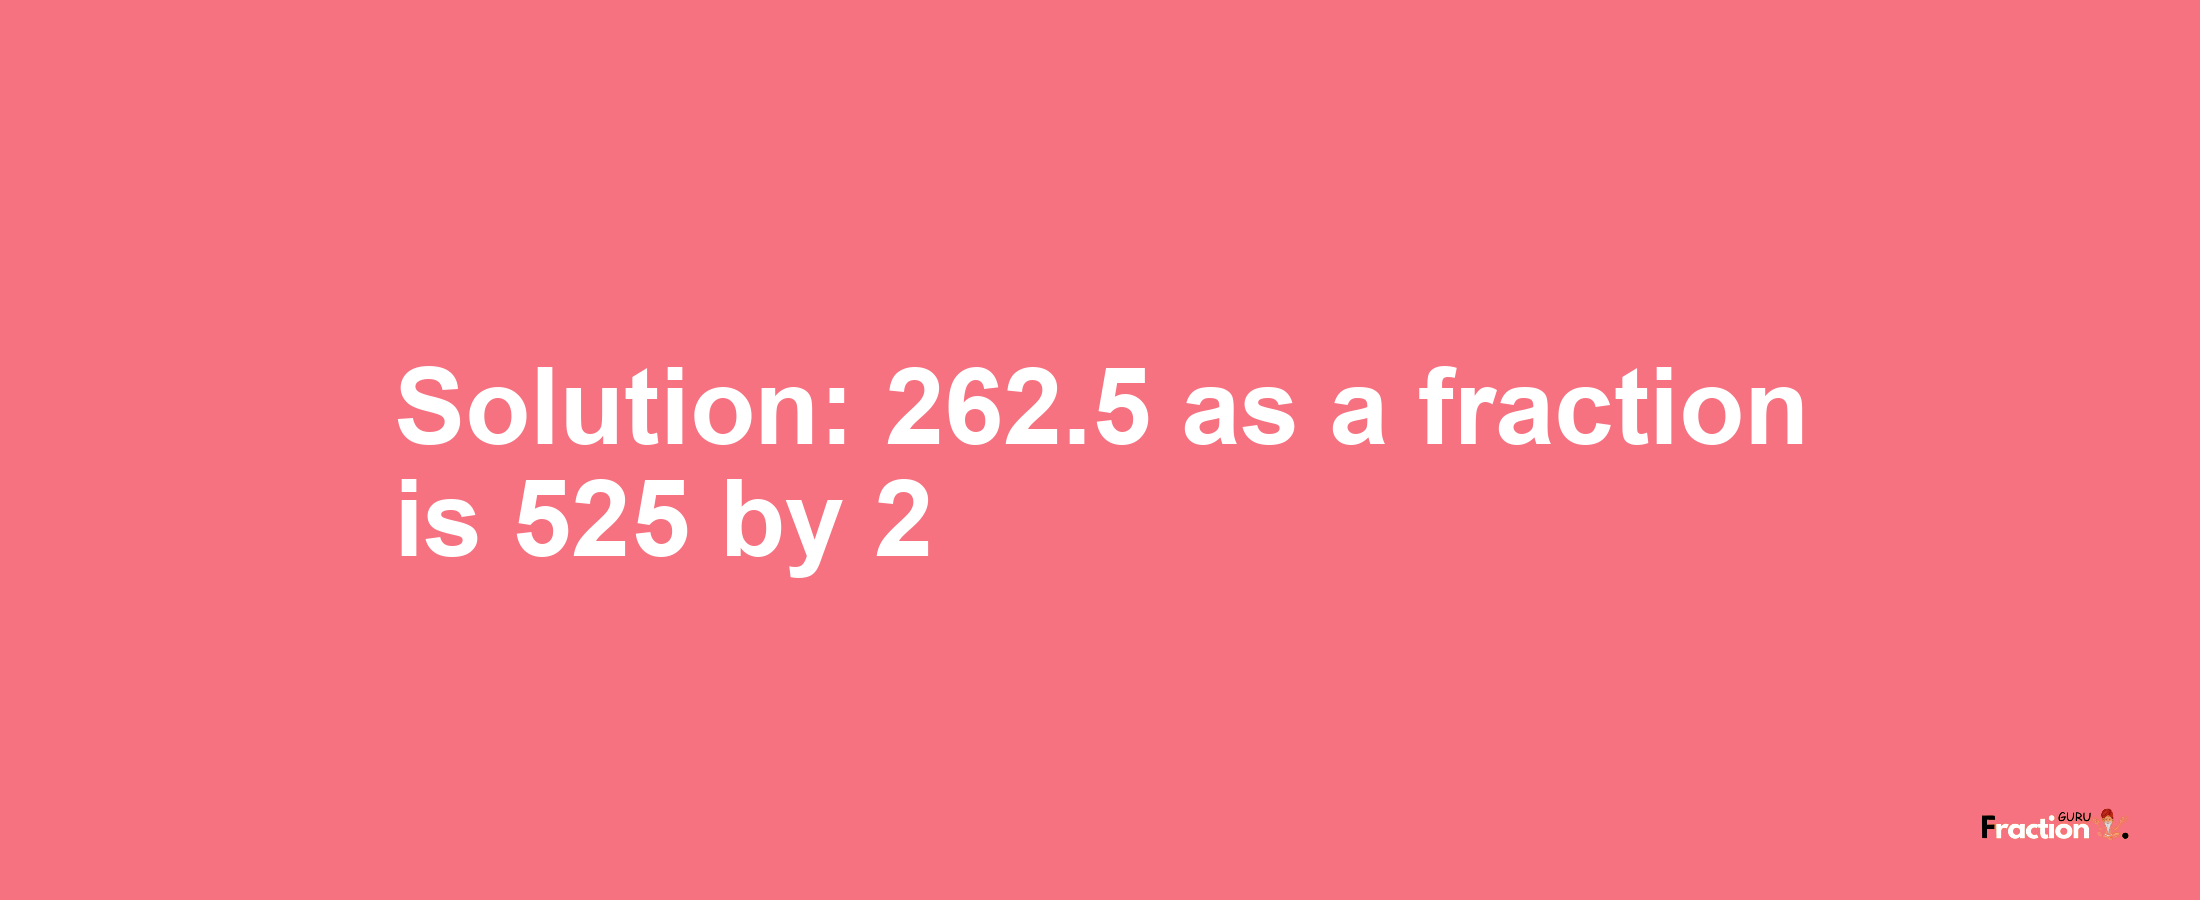 Solution:262.5 as a fraction is 525/2